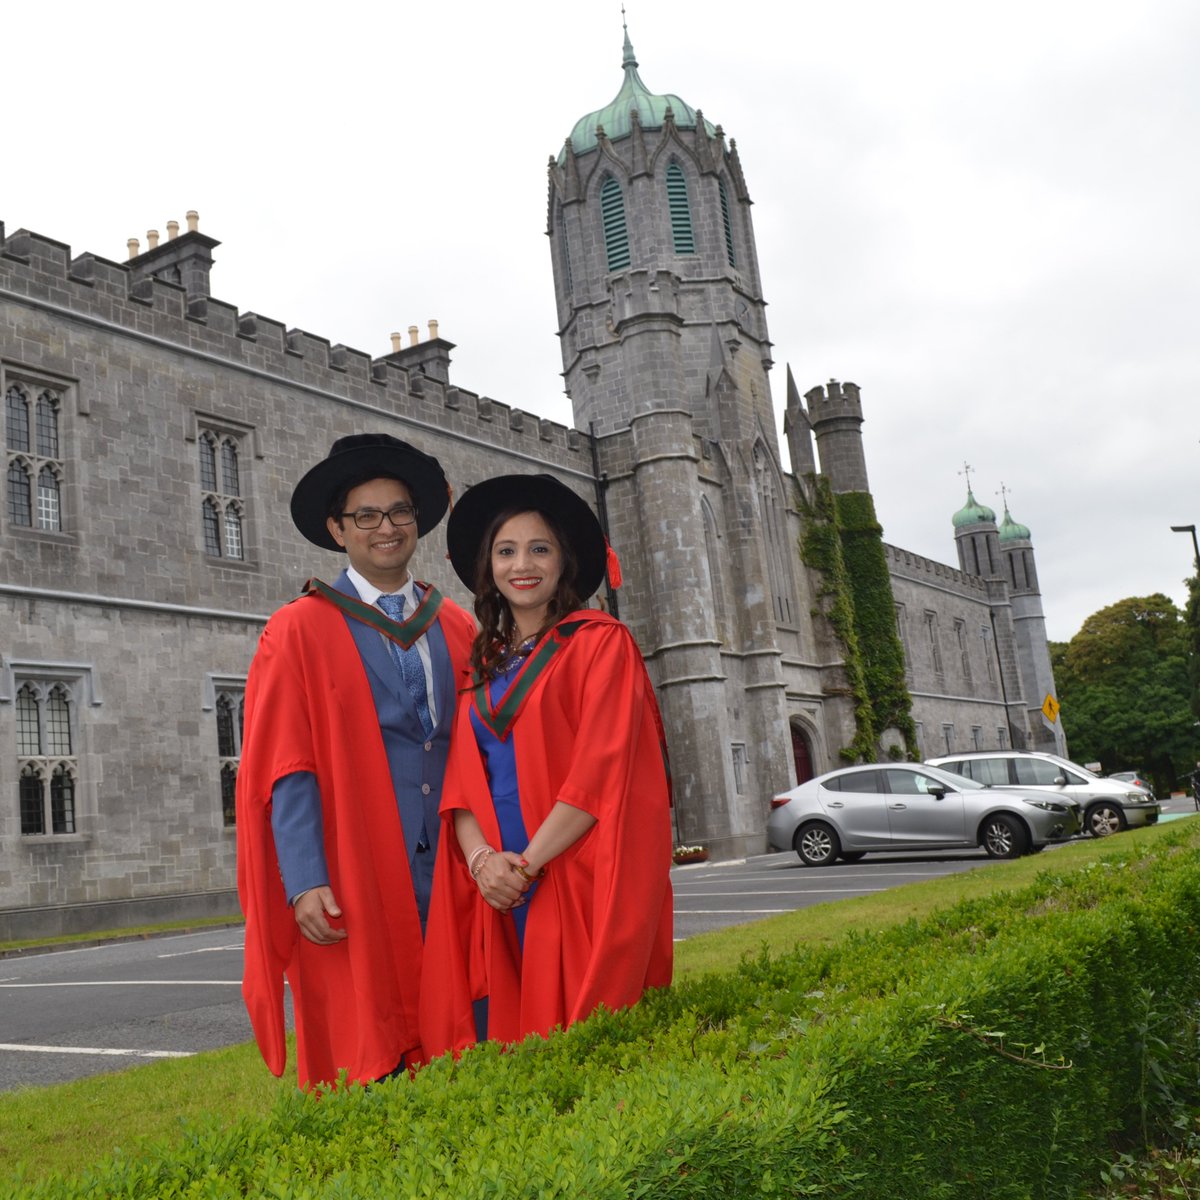 Officially graduated virtually from @nuigalway :) #virtualgraduation @NUIGalwayMed @NUIGMedicine